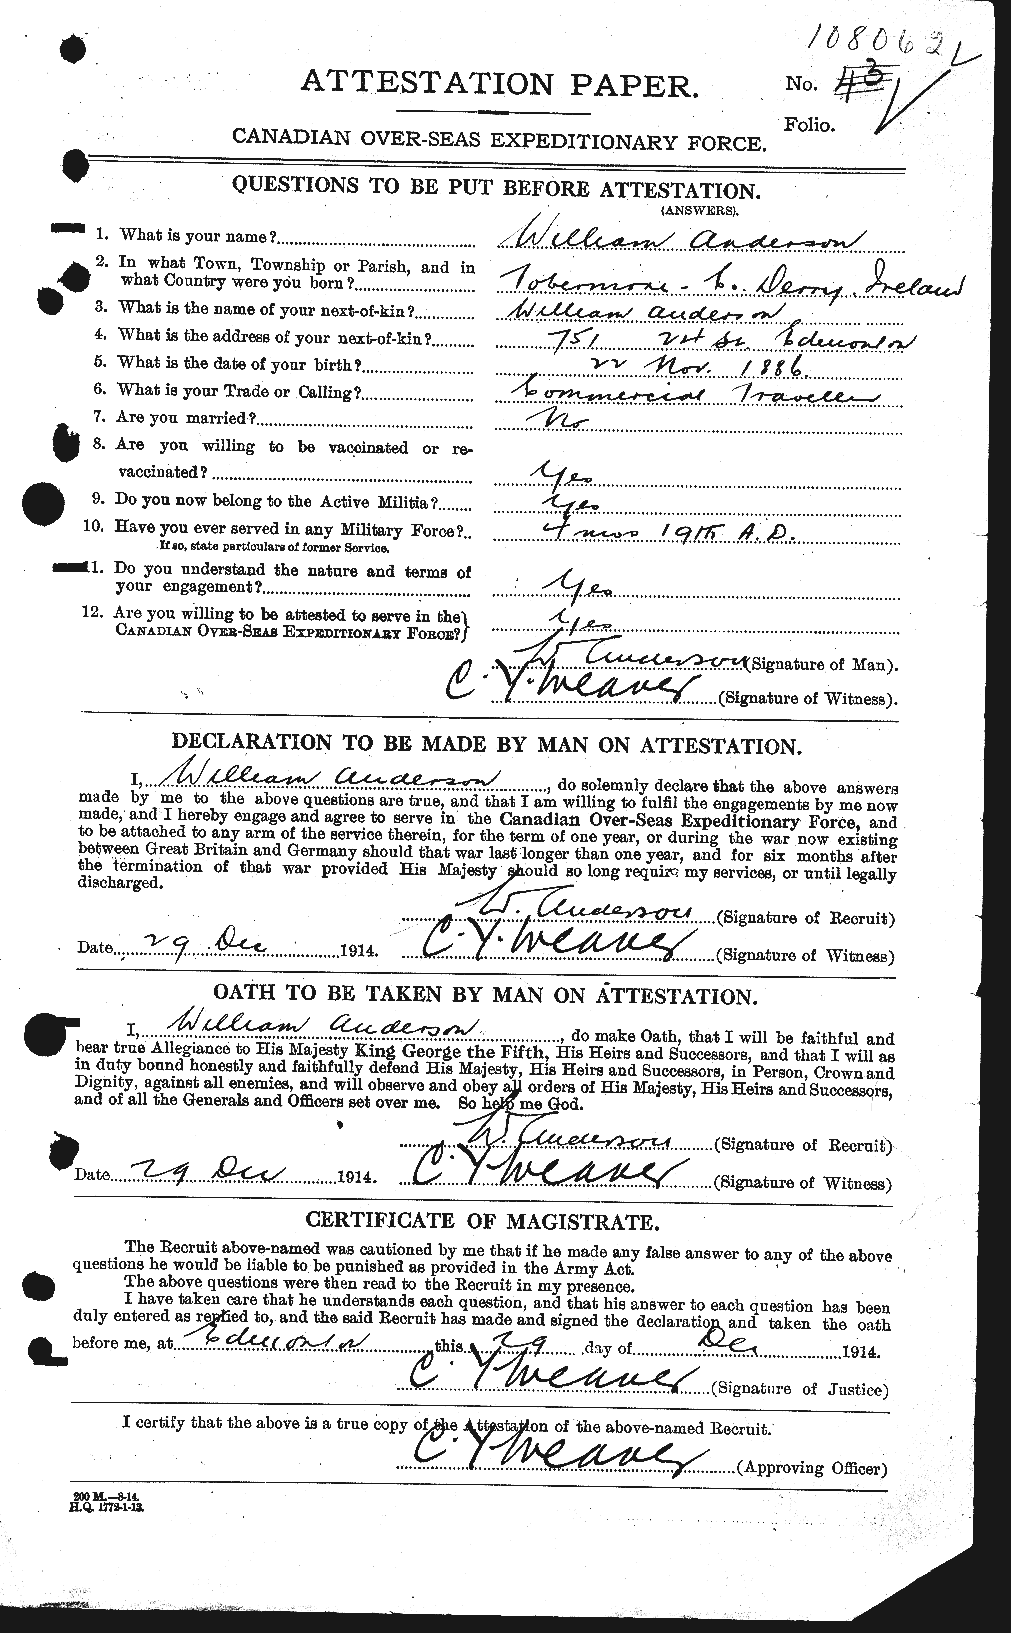 Personnel Records of the First World War - CEF 210752a